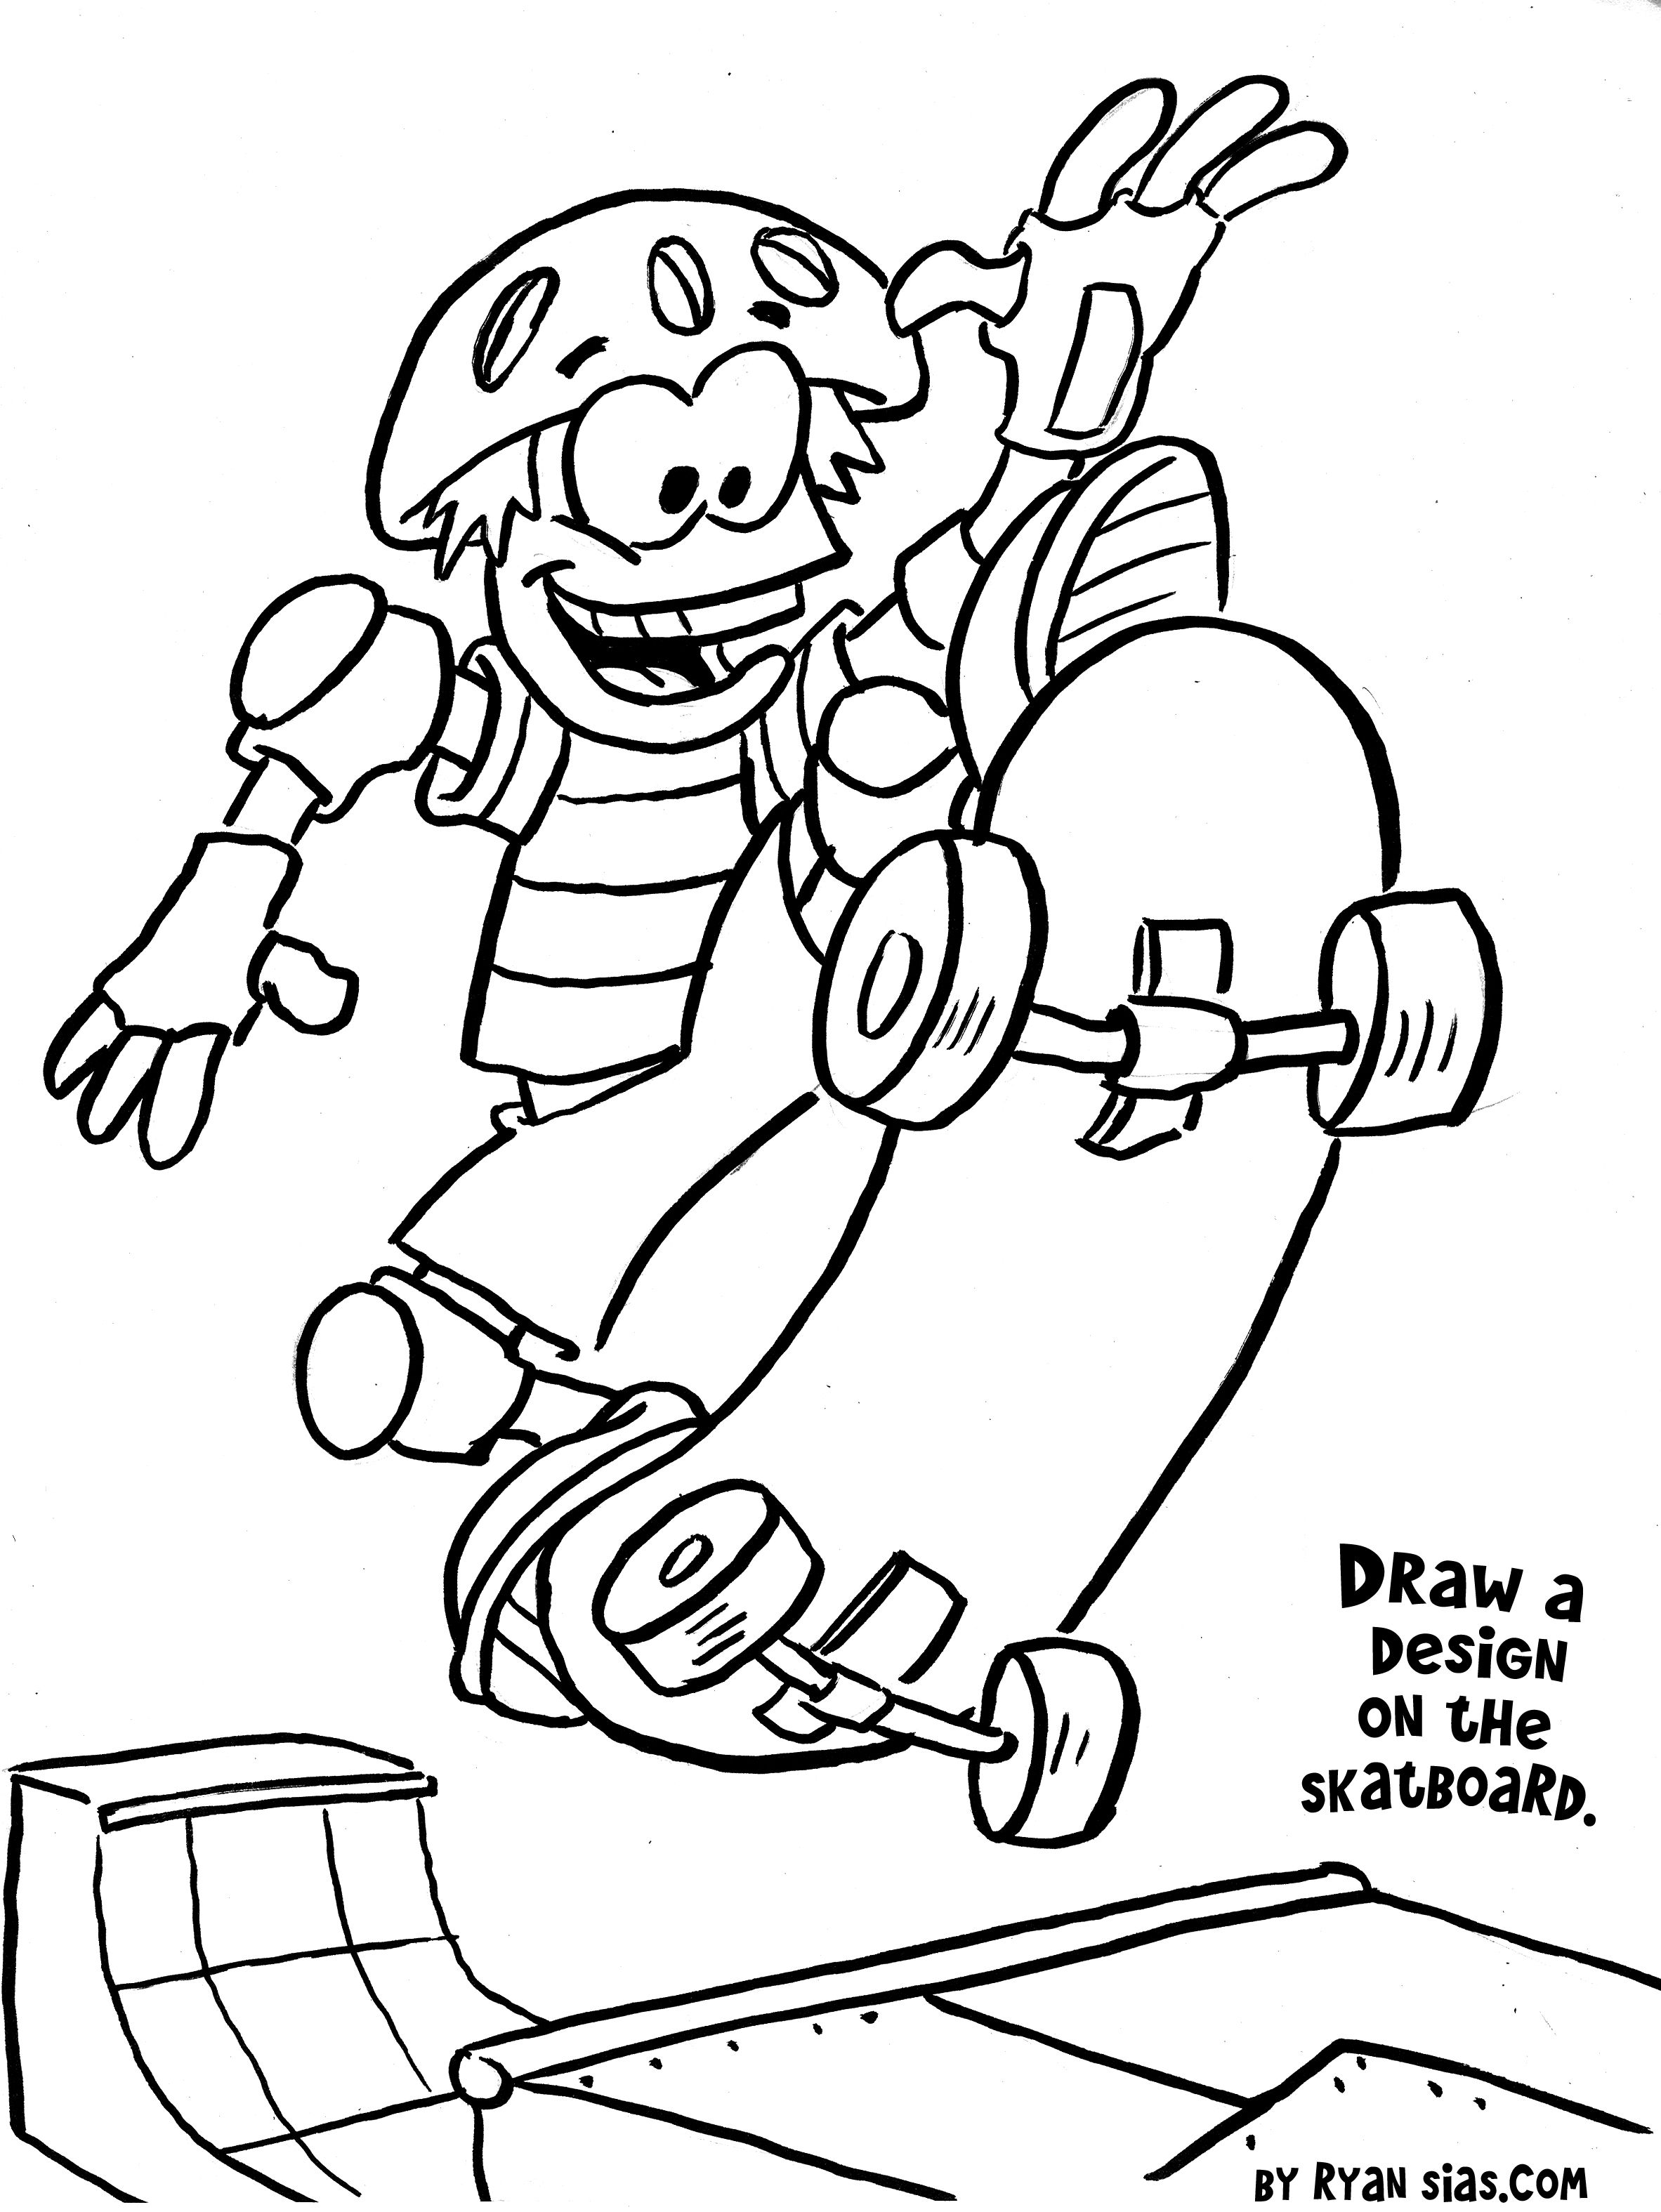 The best free Skateboard coloring page images. Download from 66 free